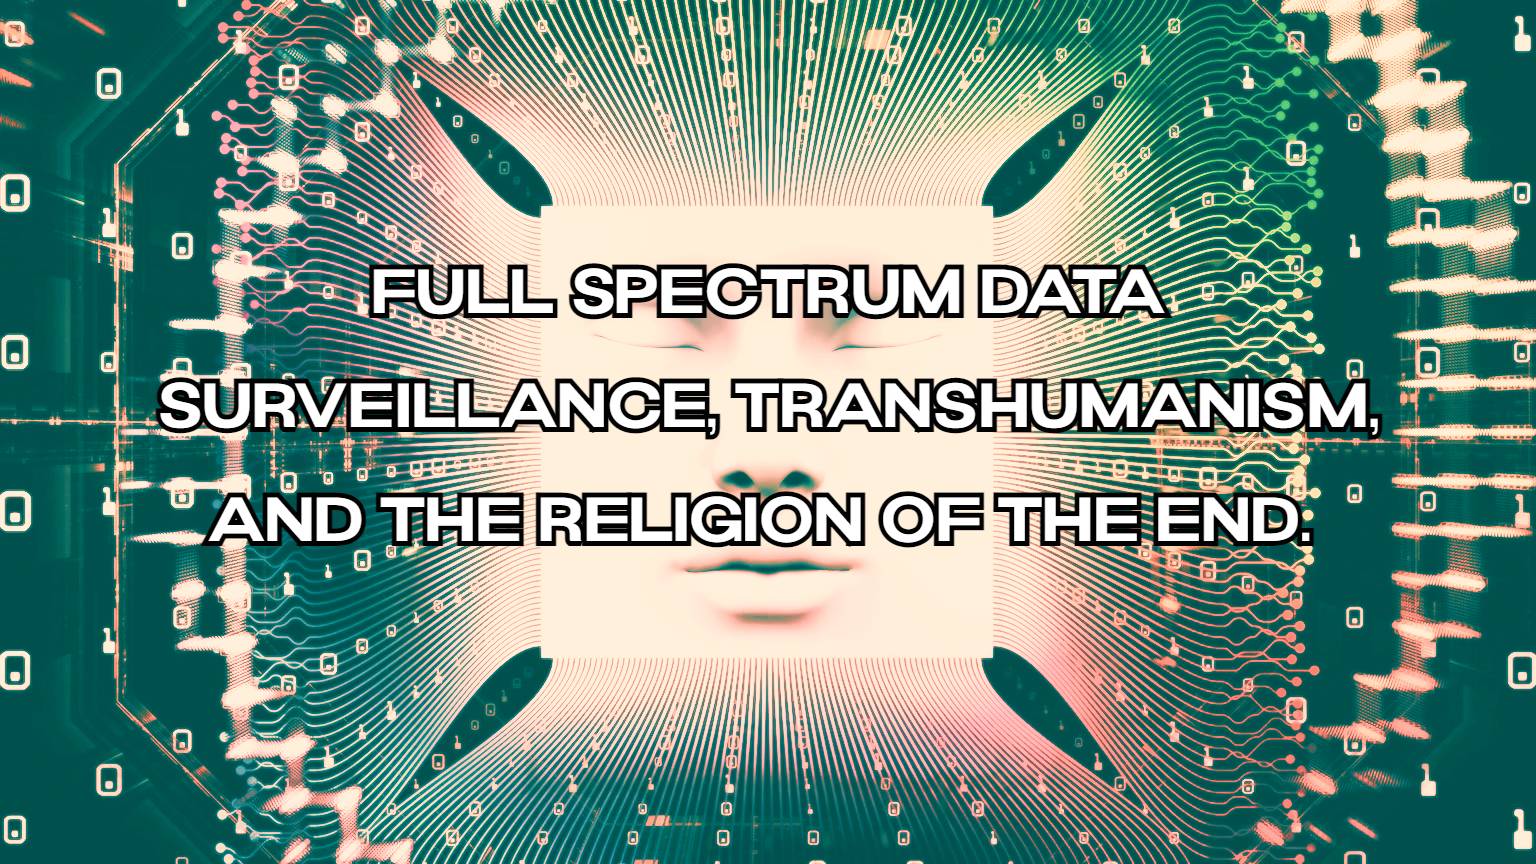 Full Spectrum Data Surveillance, Transhumanism, and the Religion of the End.